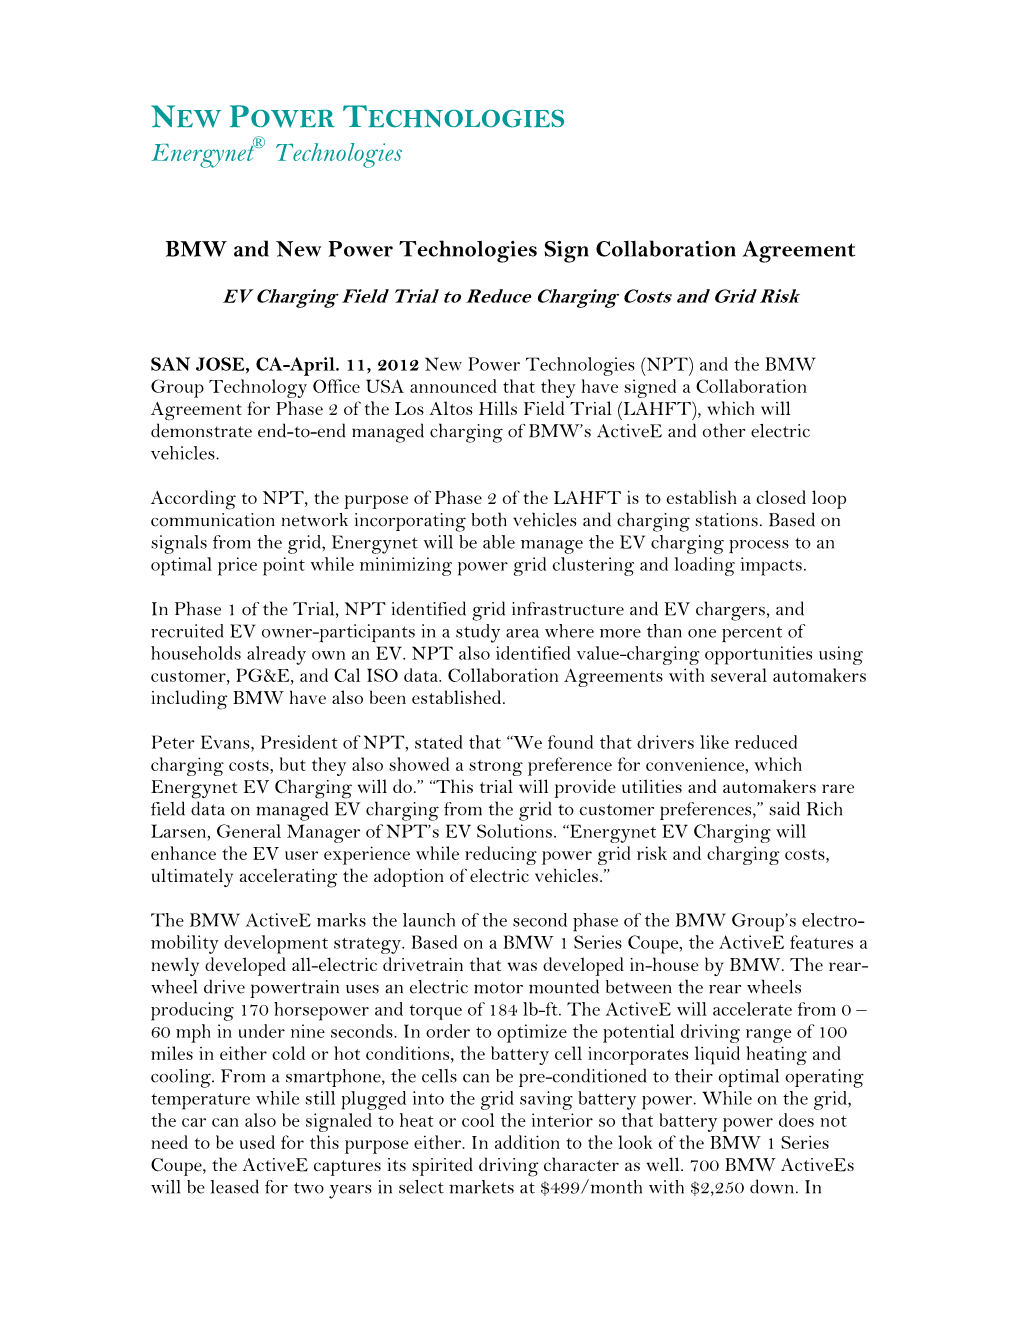 BMW and New Power Technologies Sign Collaboration Agreement